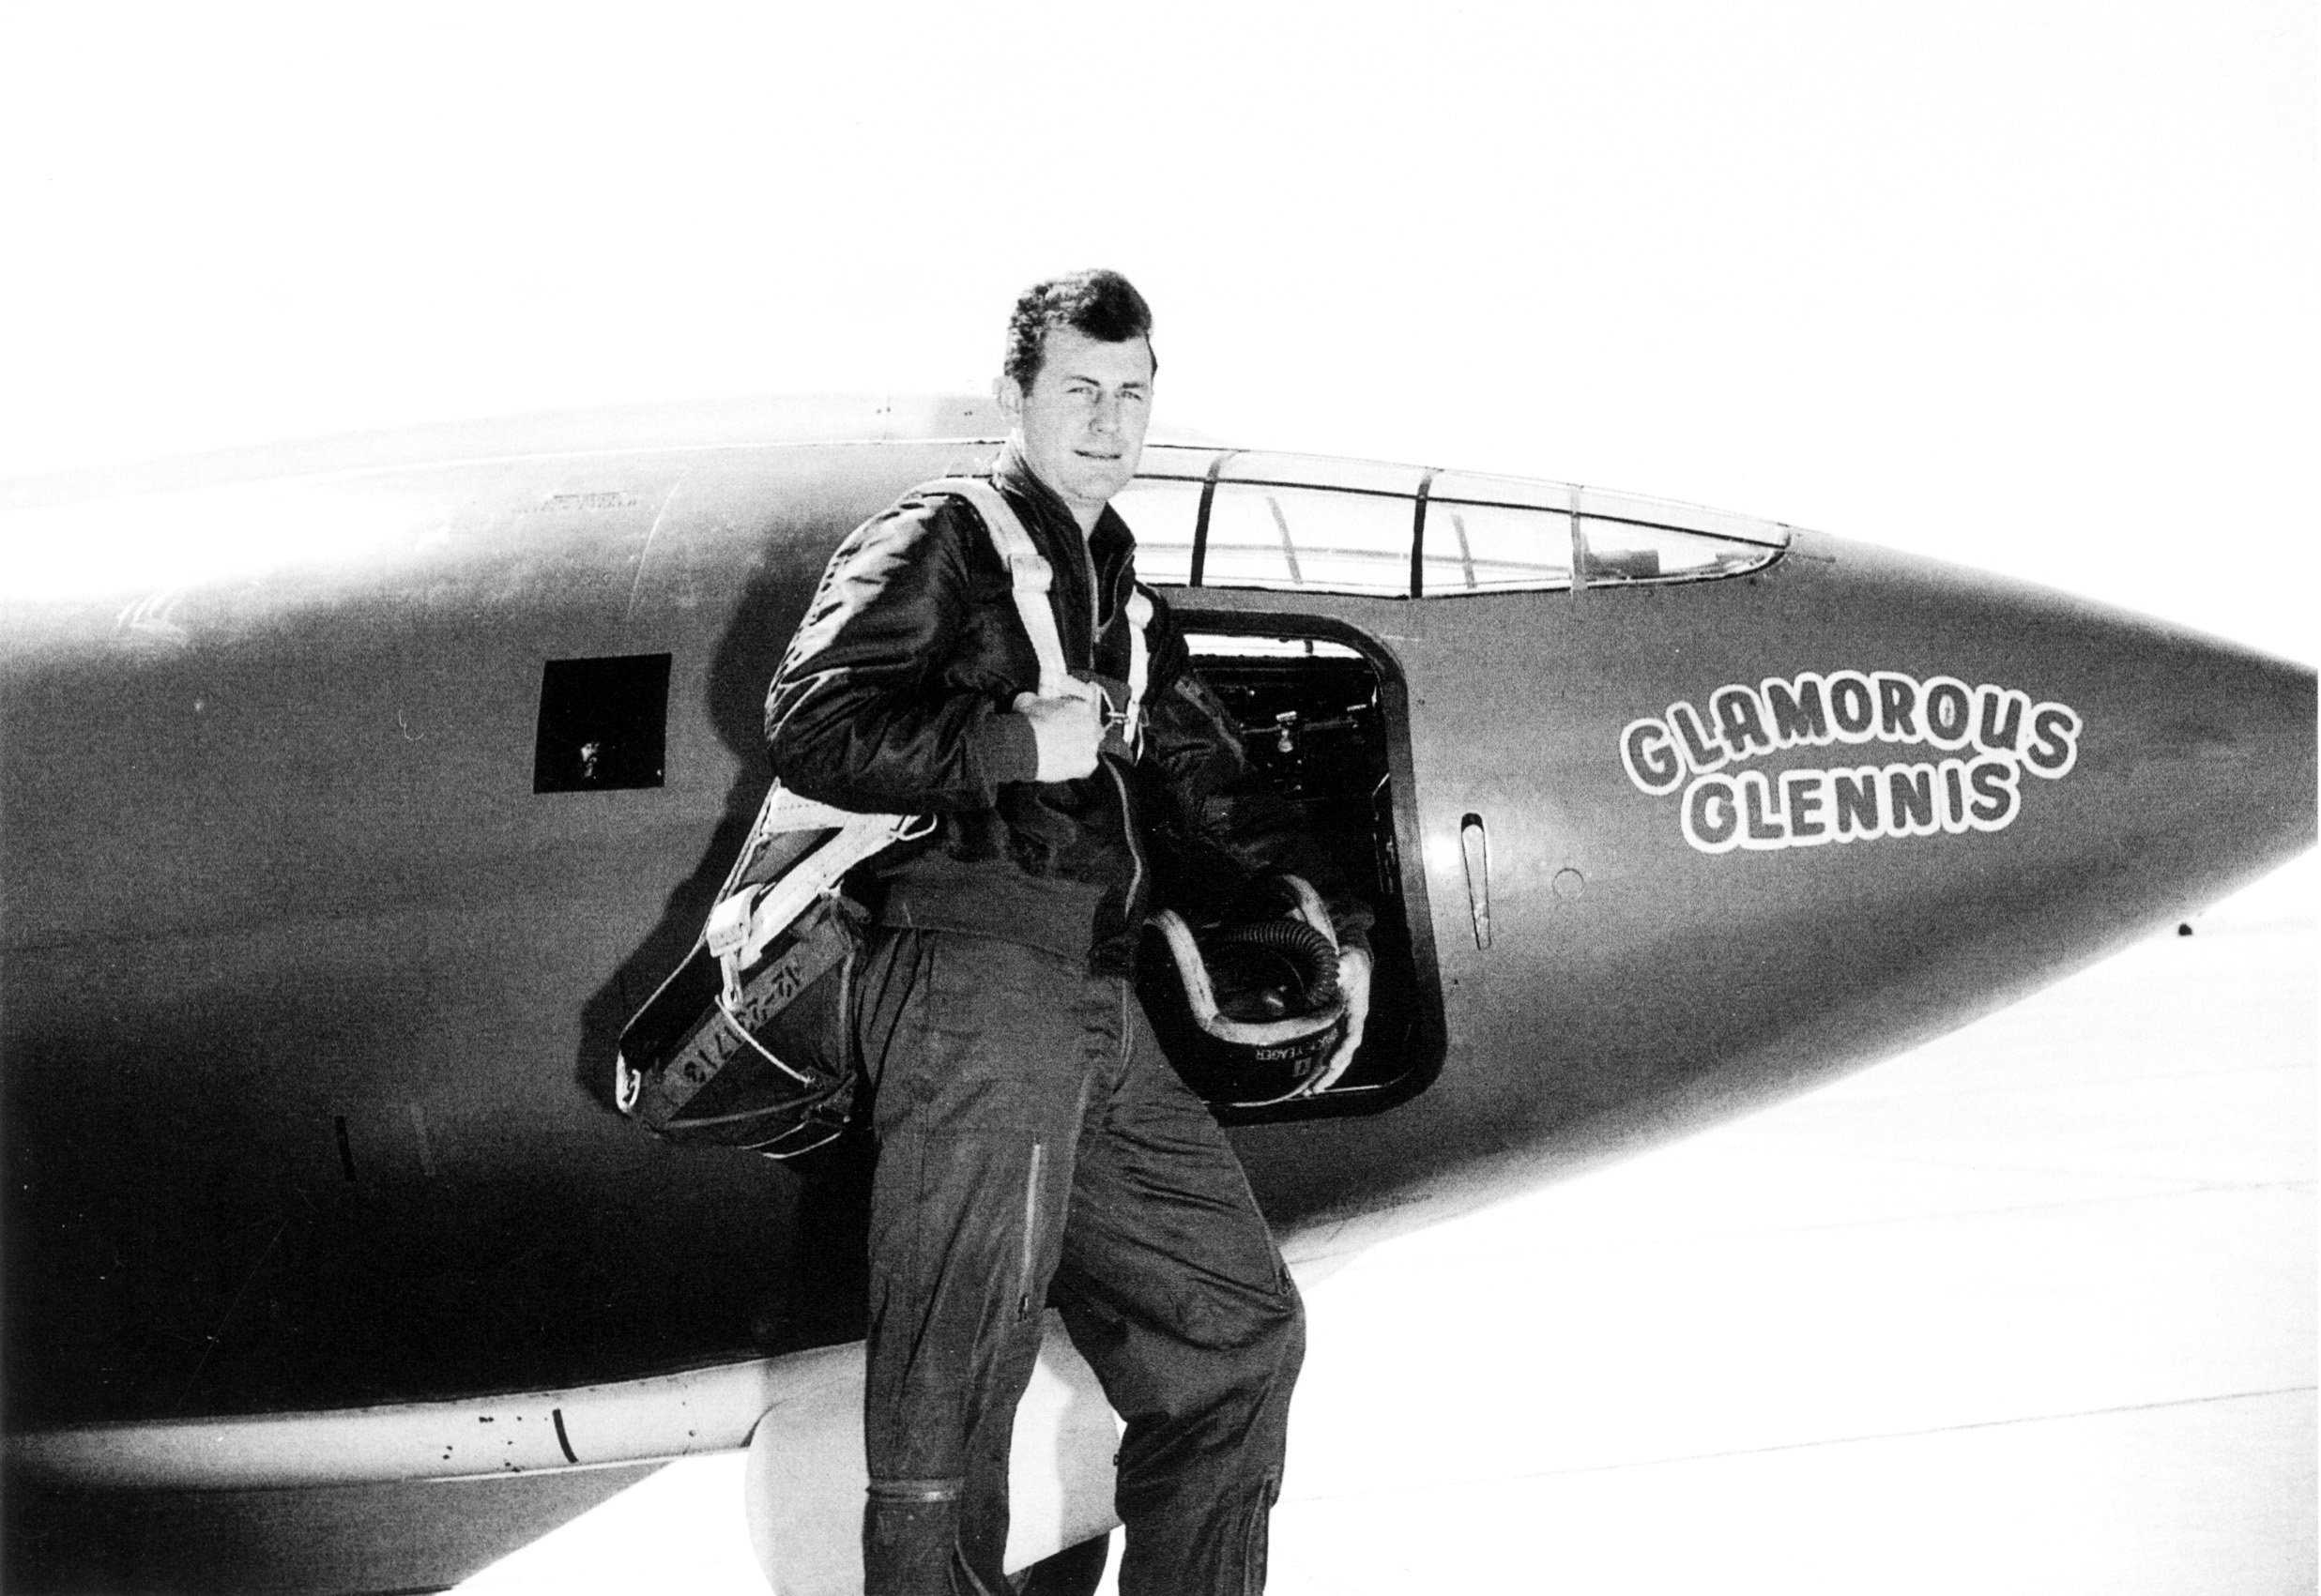 Chuck Yeager next to experimental aircraft